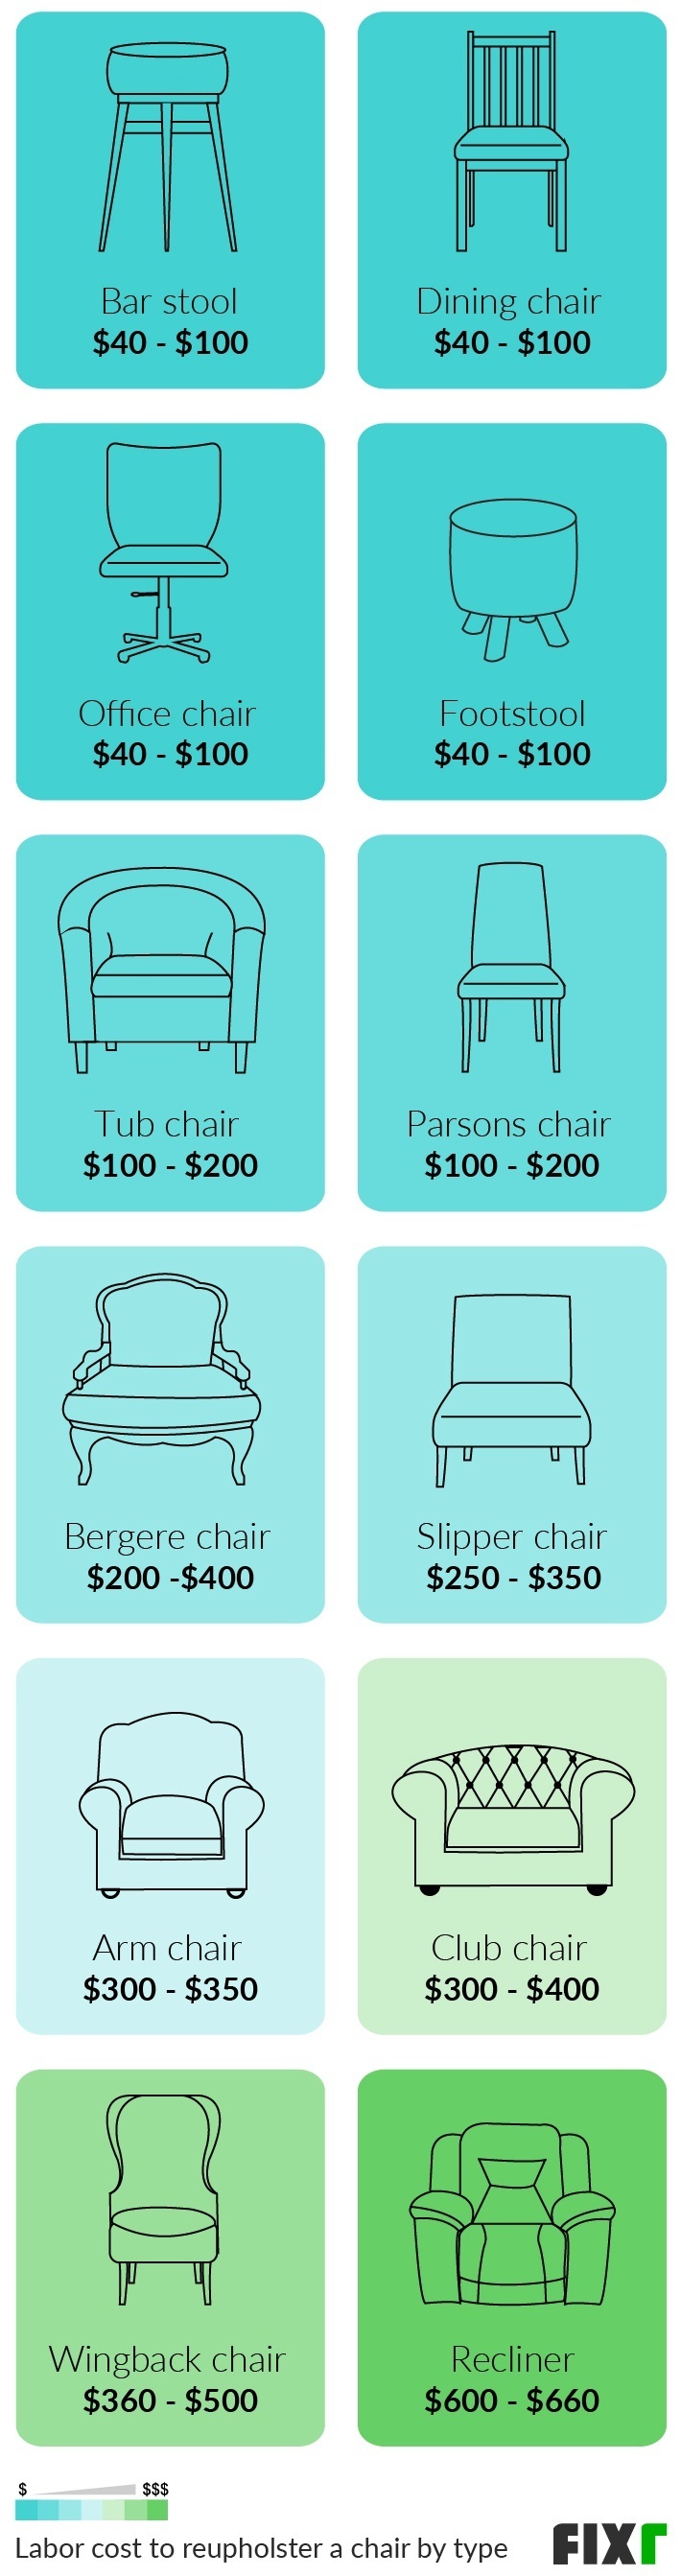 2021 Cost To Reupholster A Chair, Is It Expensive To Reupholster A Chair